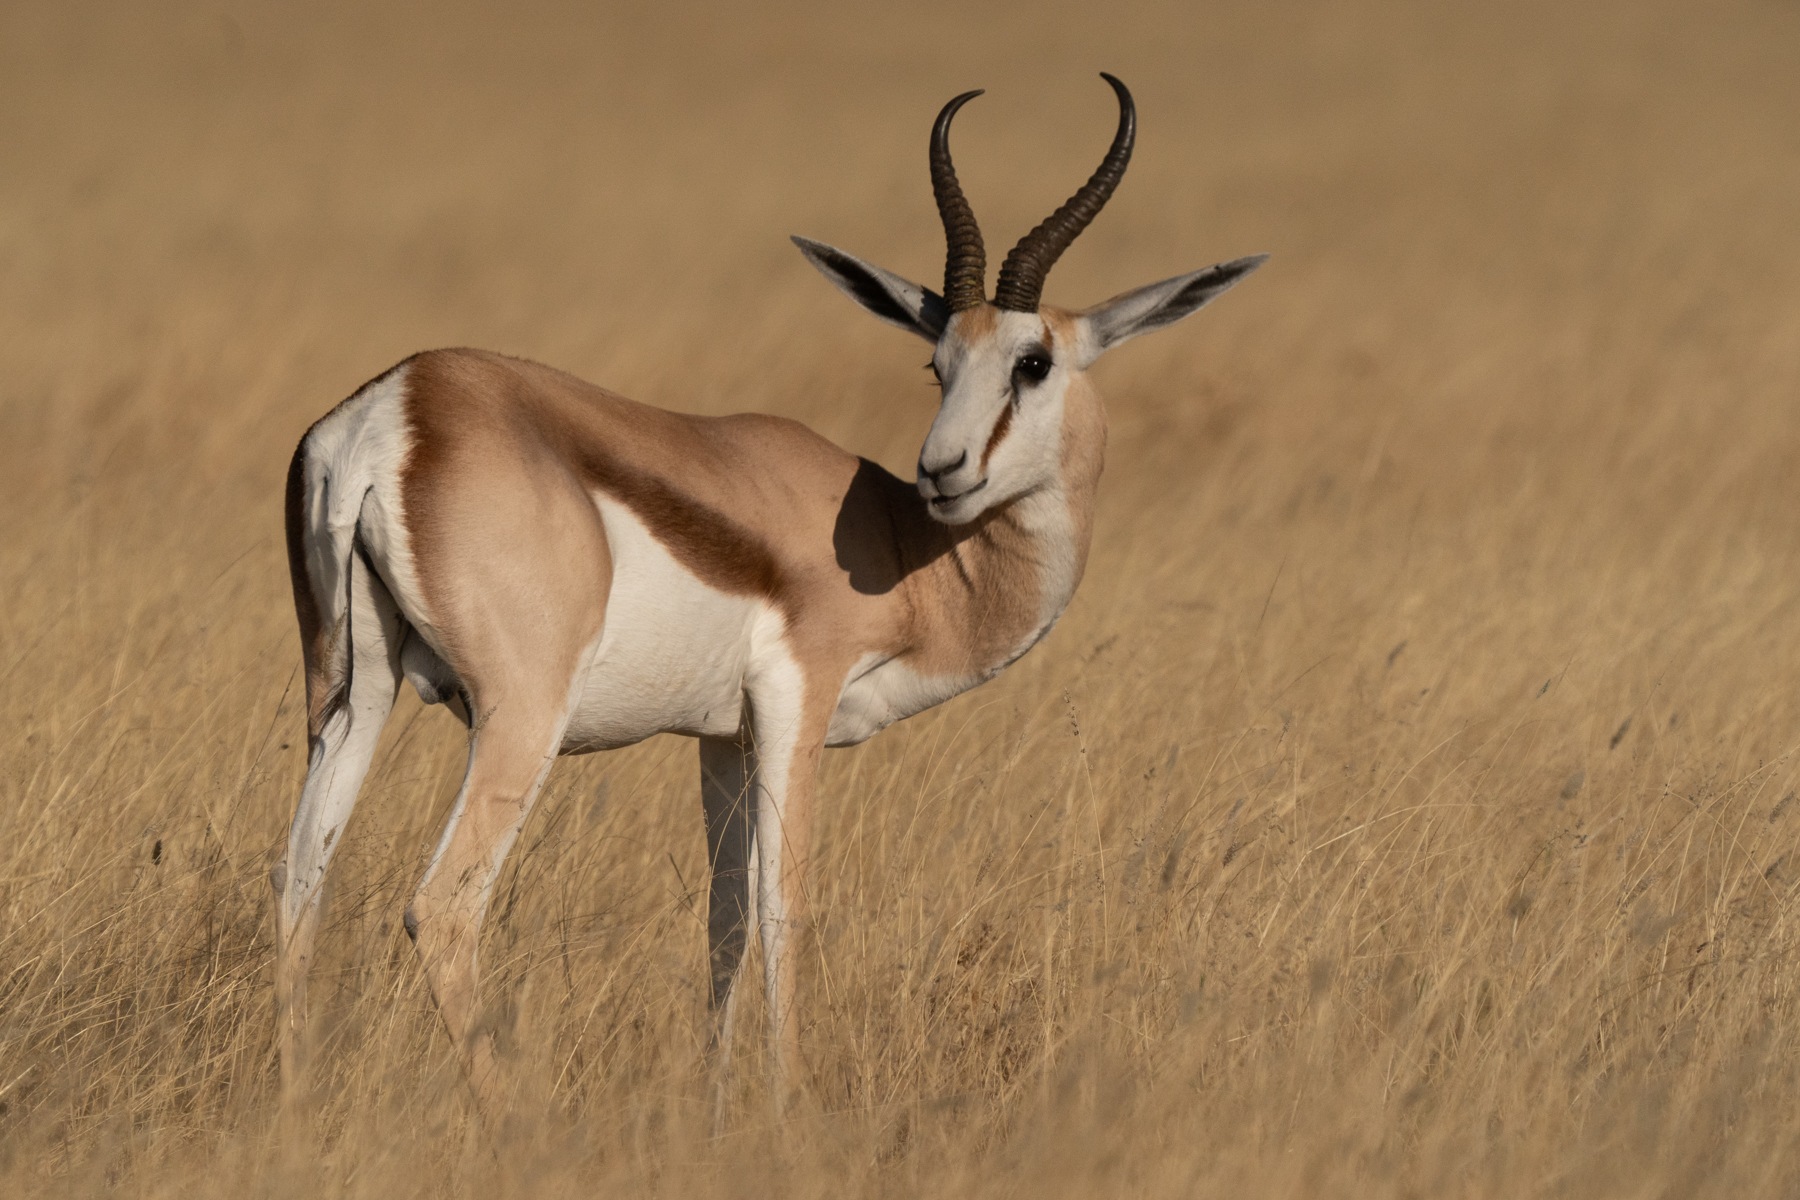 A Springbok just about to scratch an itch in Etosha